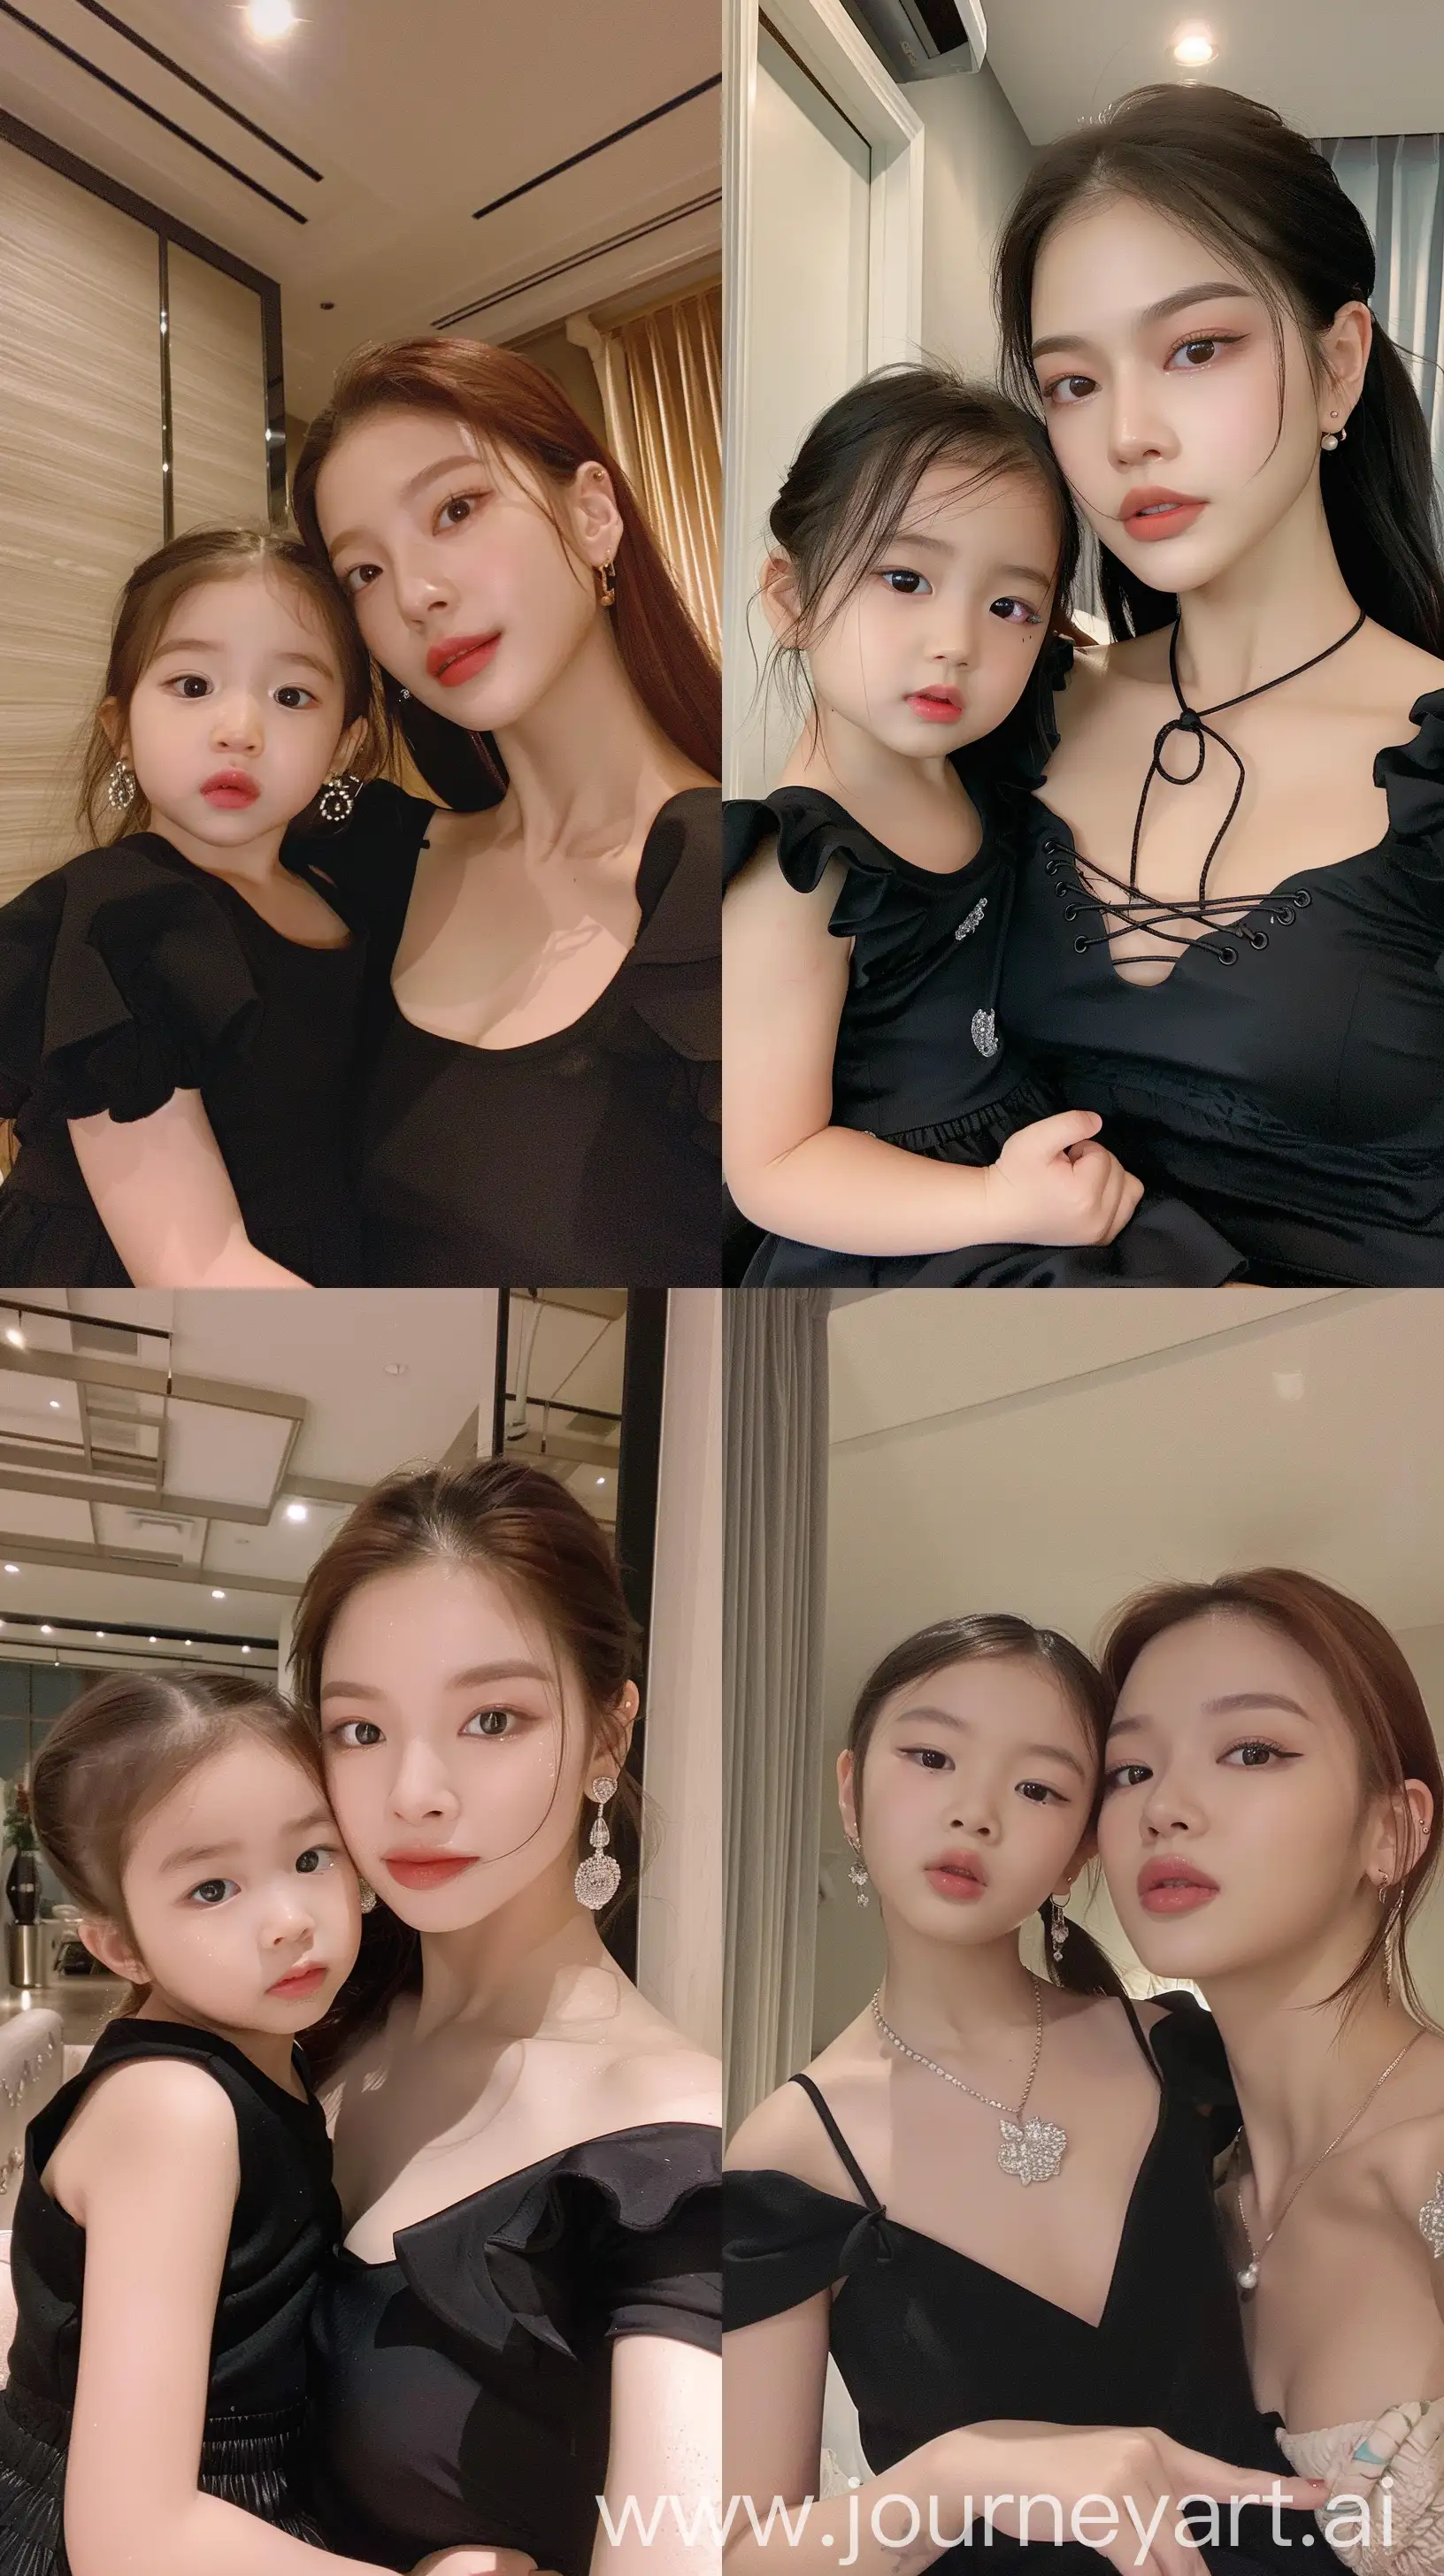 Jennies-Aesthetic-Selfie-with-a-Young-Admirer